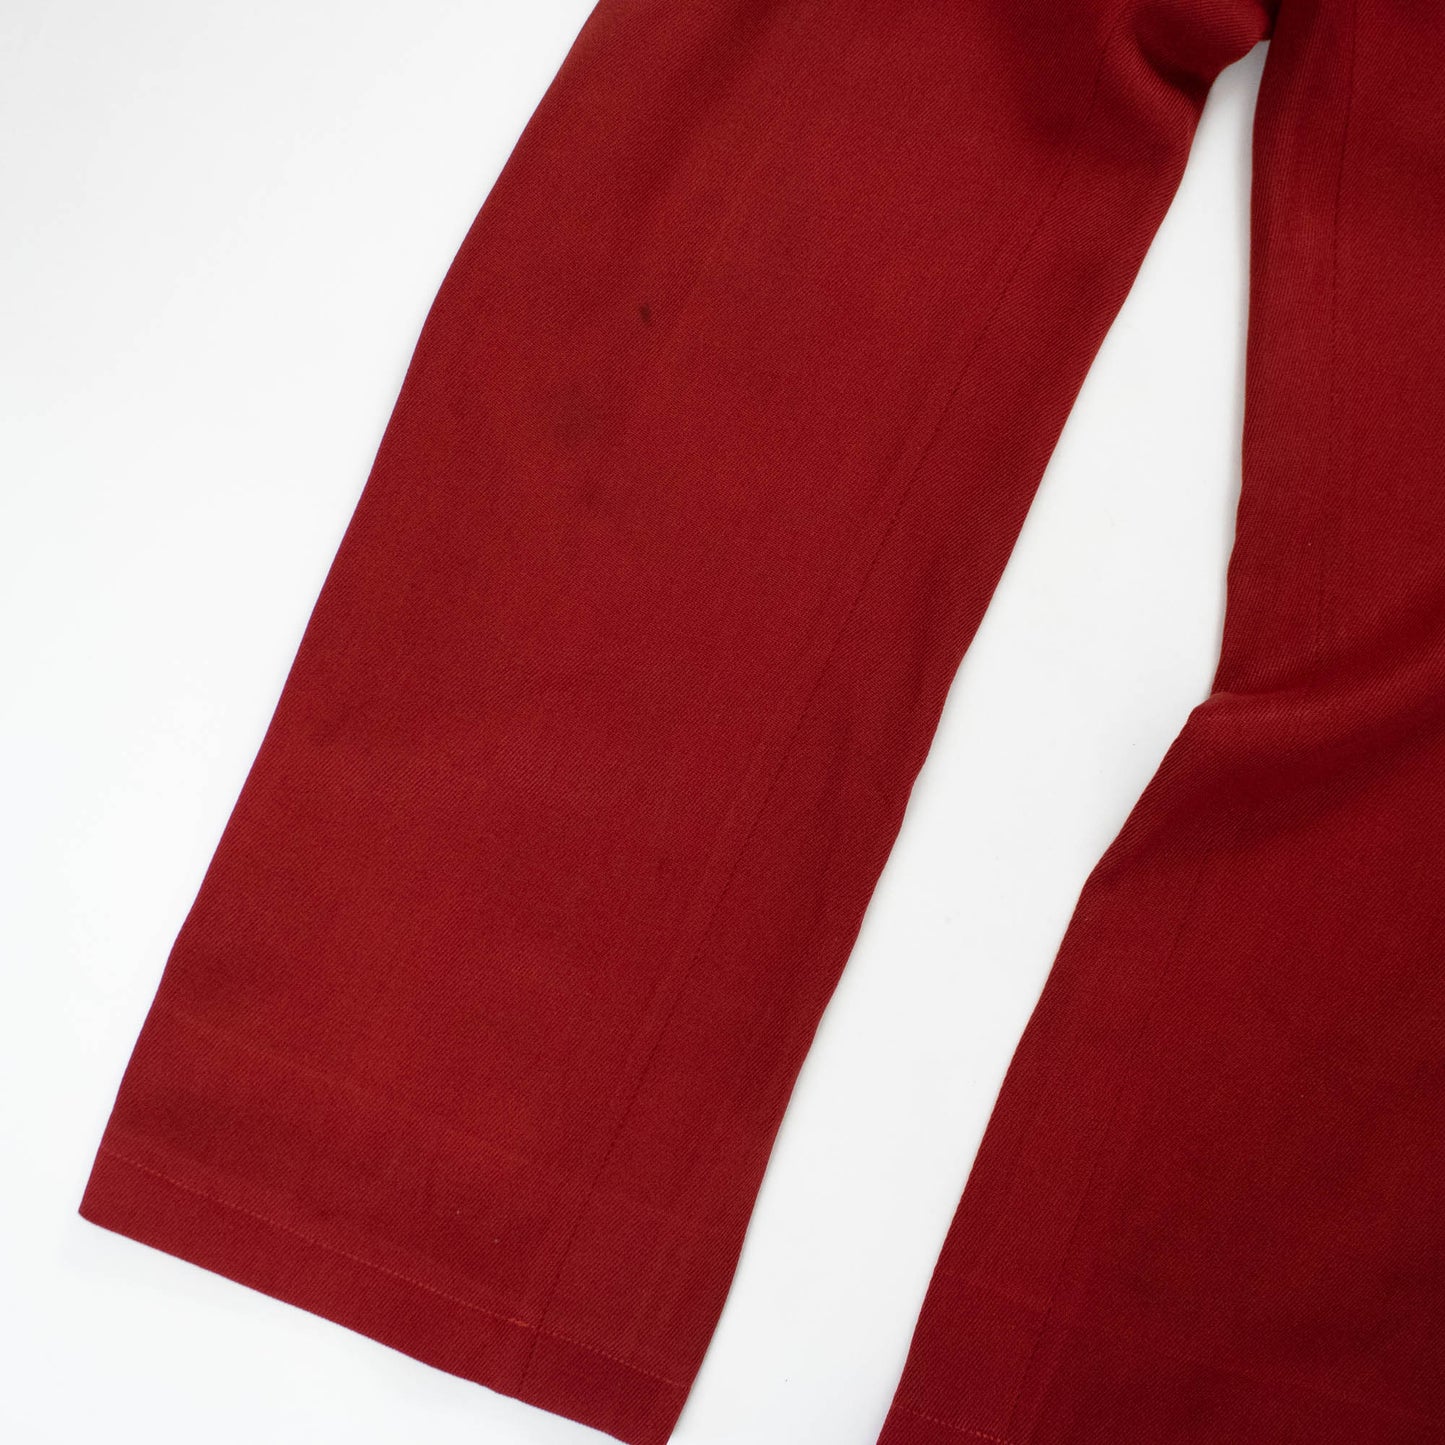 40s Red Wool Trousers